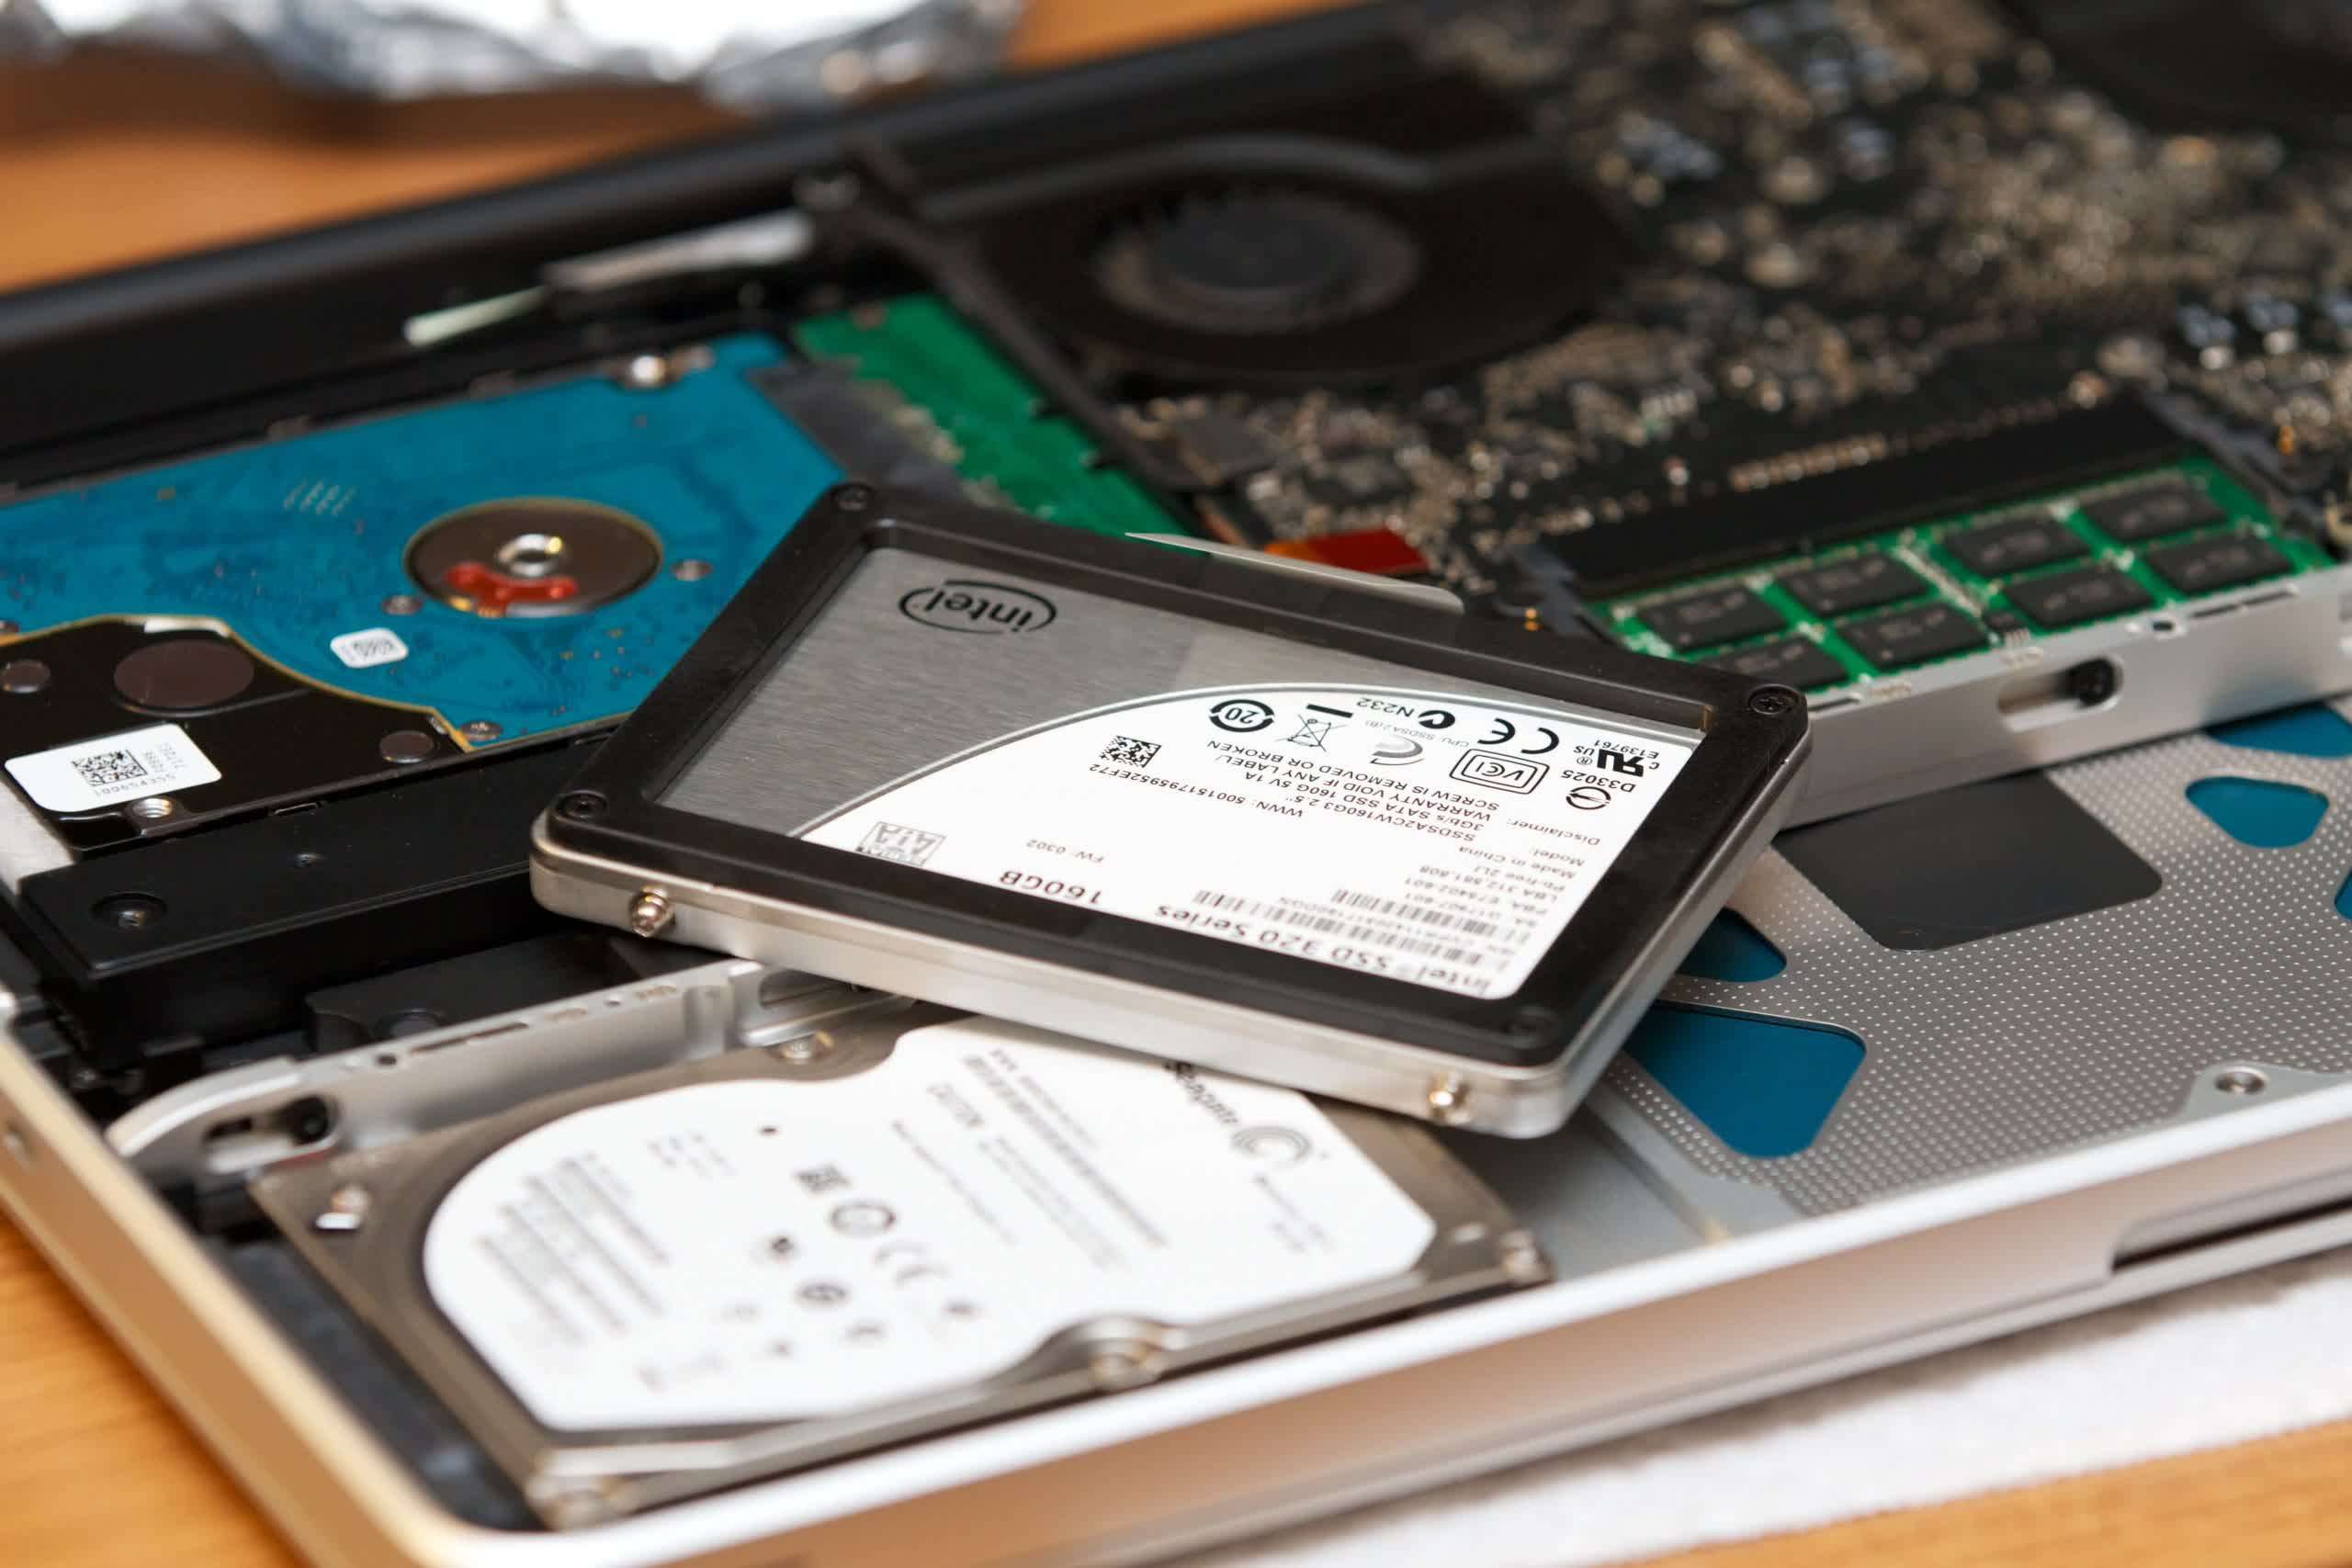 TrendForce says SSD prices haven't hit rock bottom yet